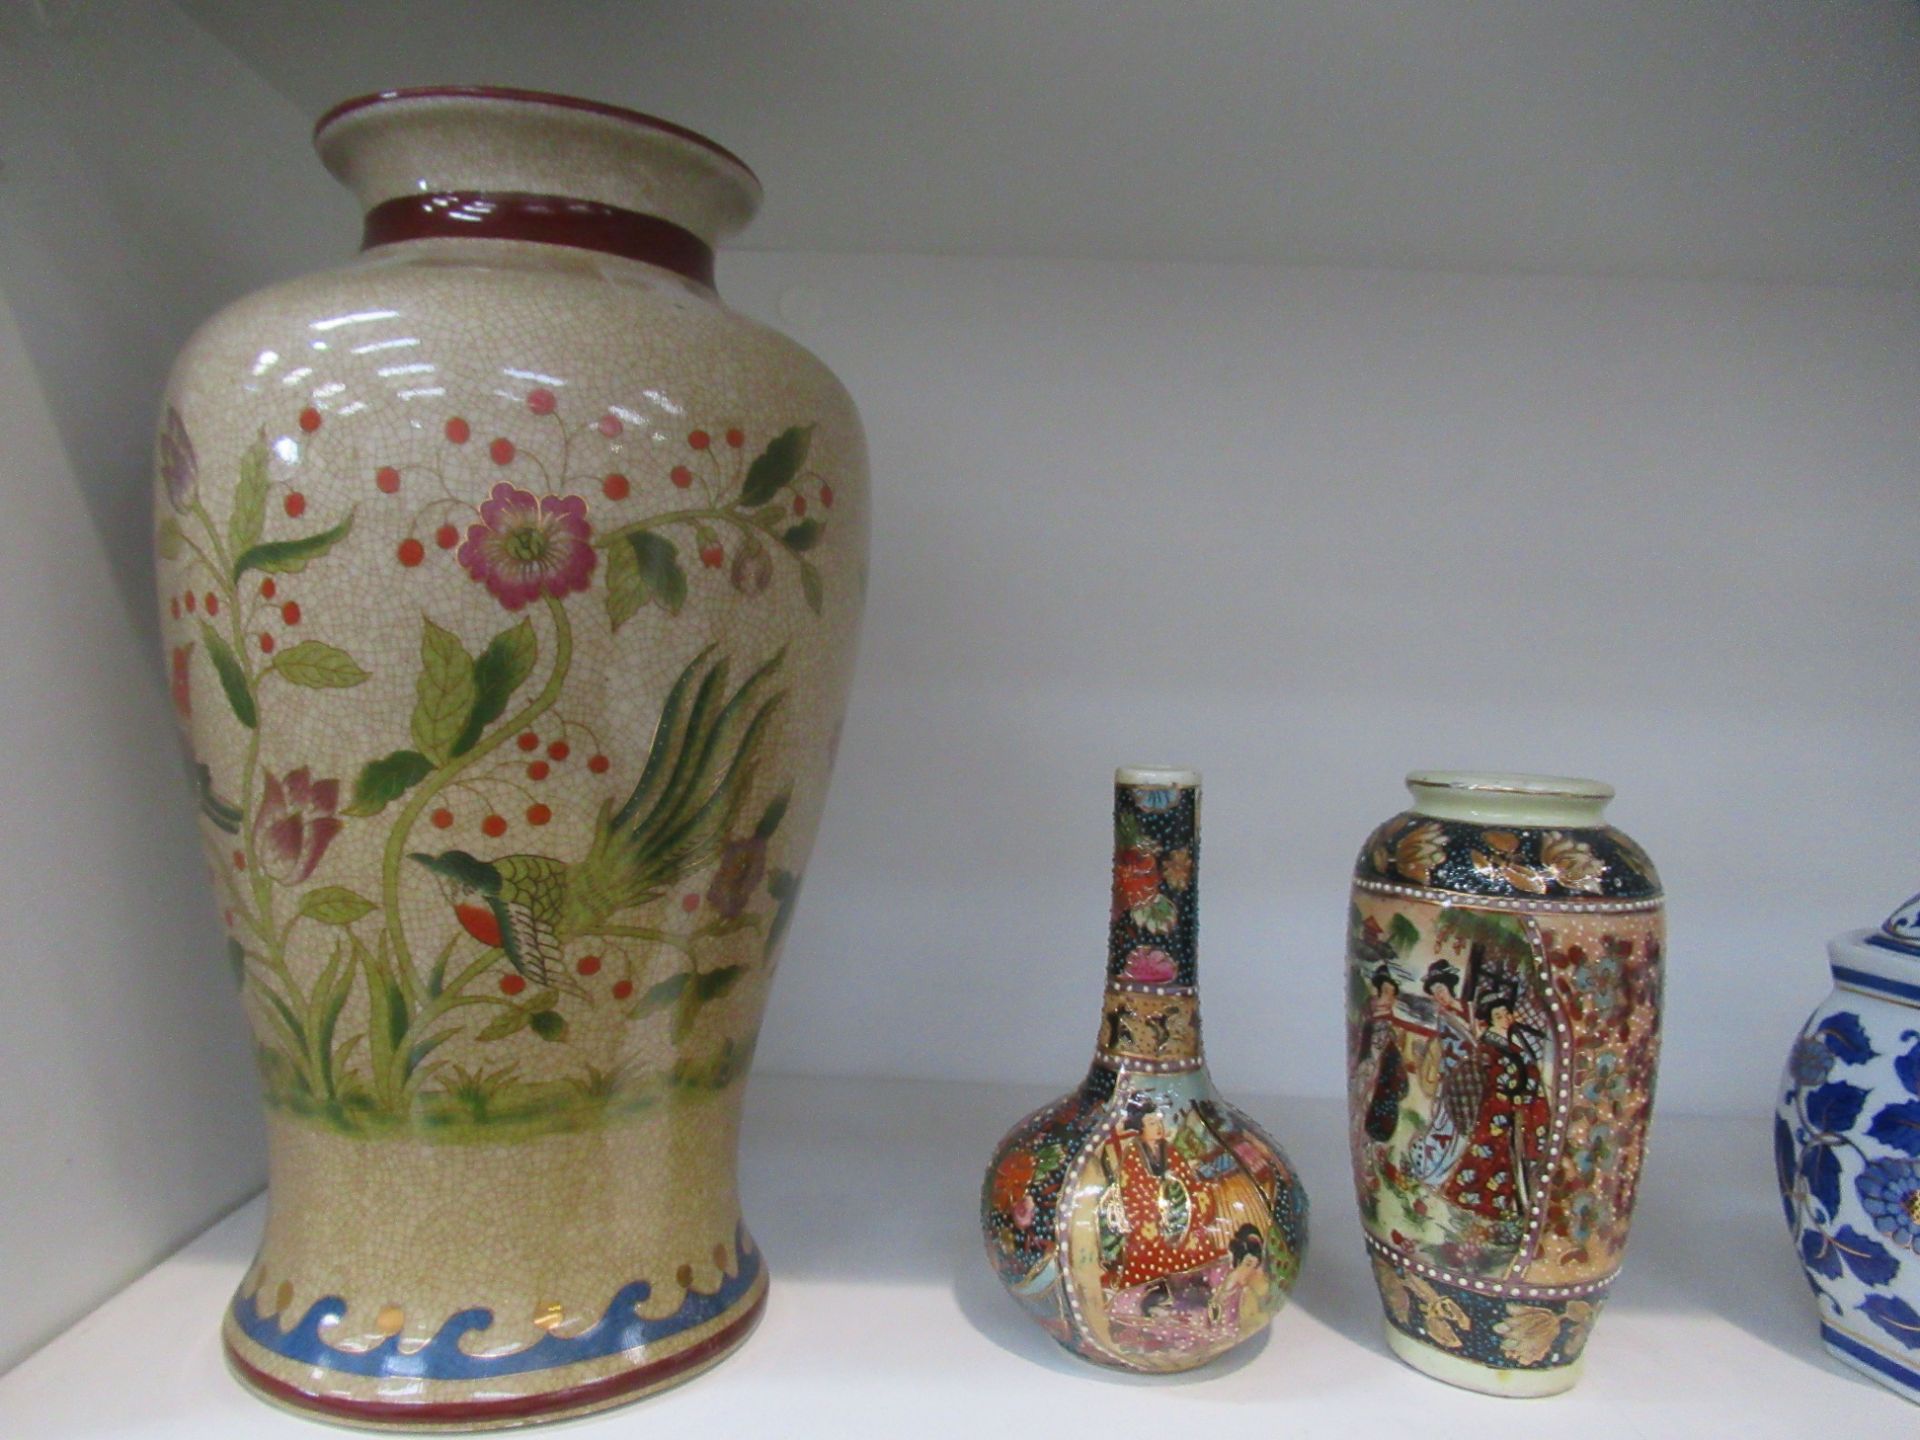 Shelf of Various Porcelain Items including a Vase with painted birds. - Image 3 of 9